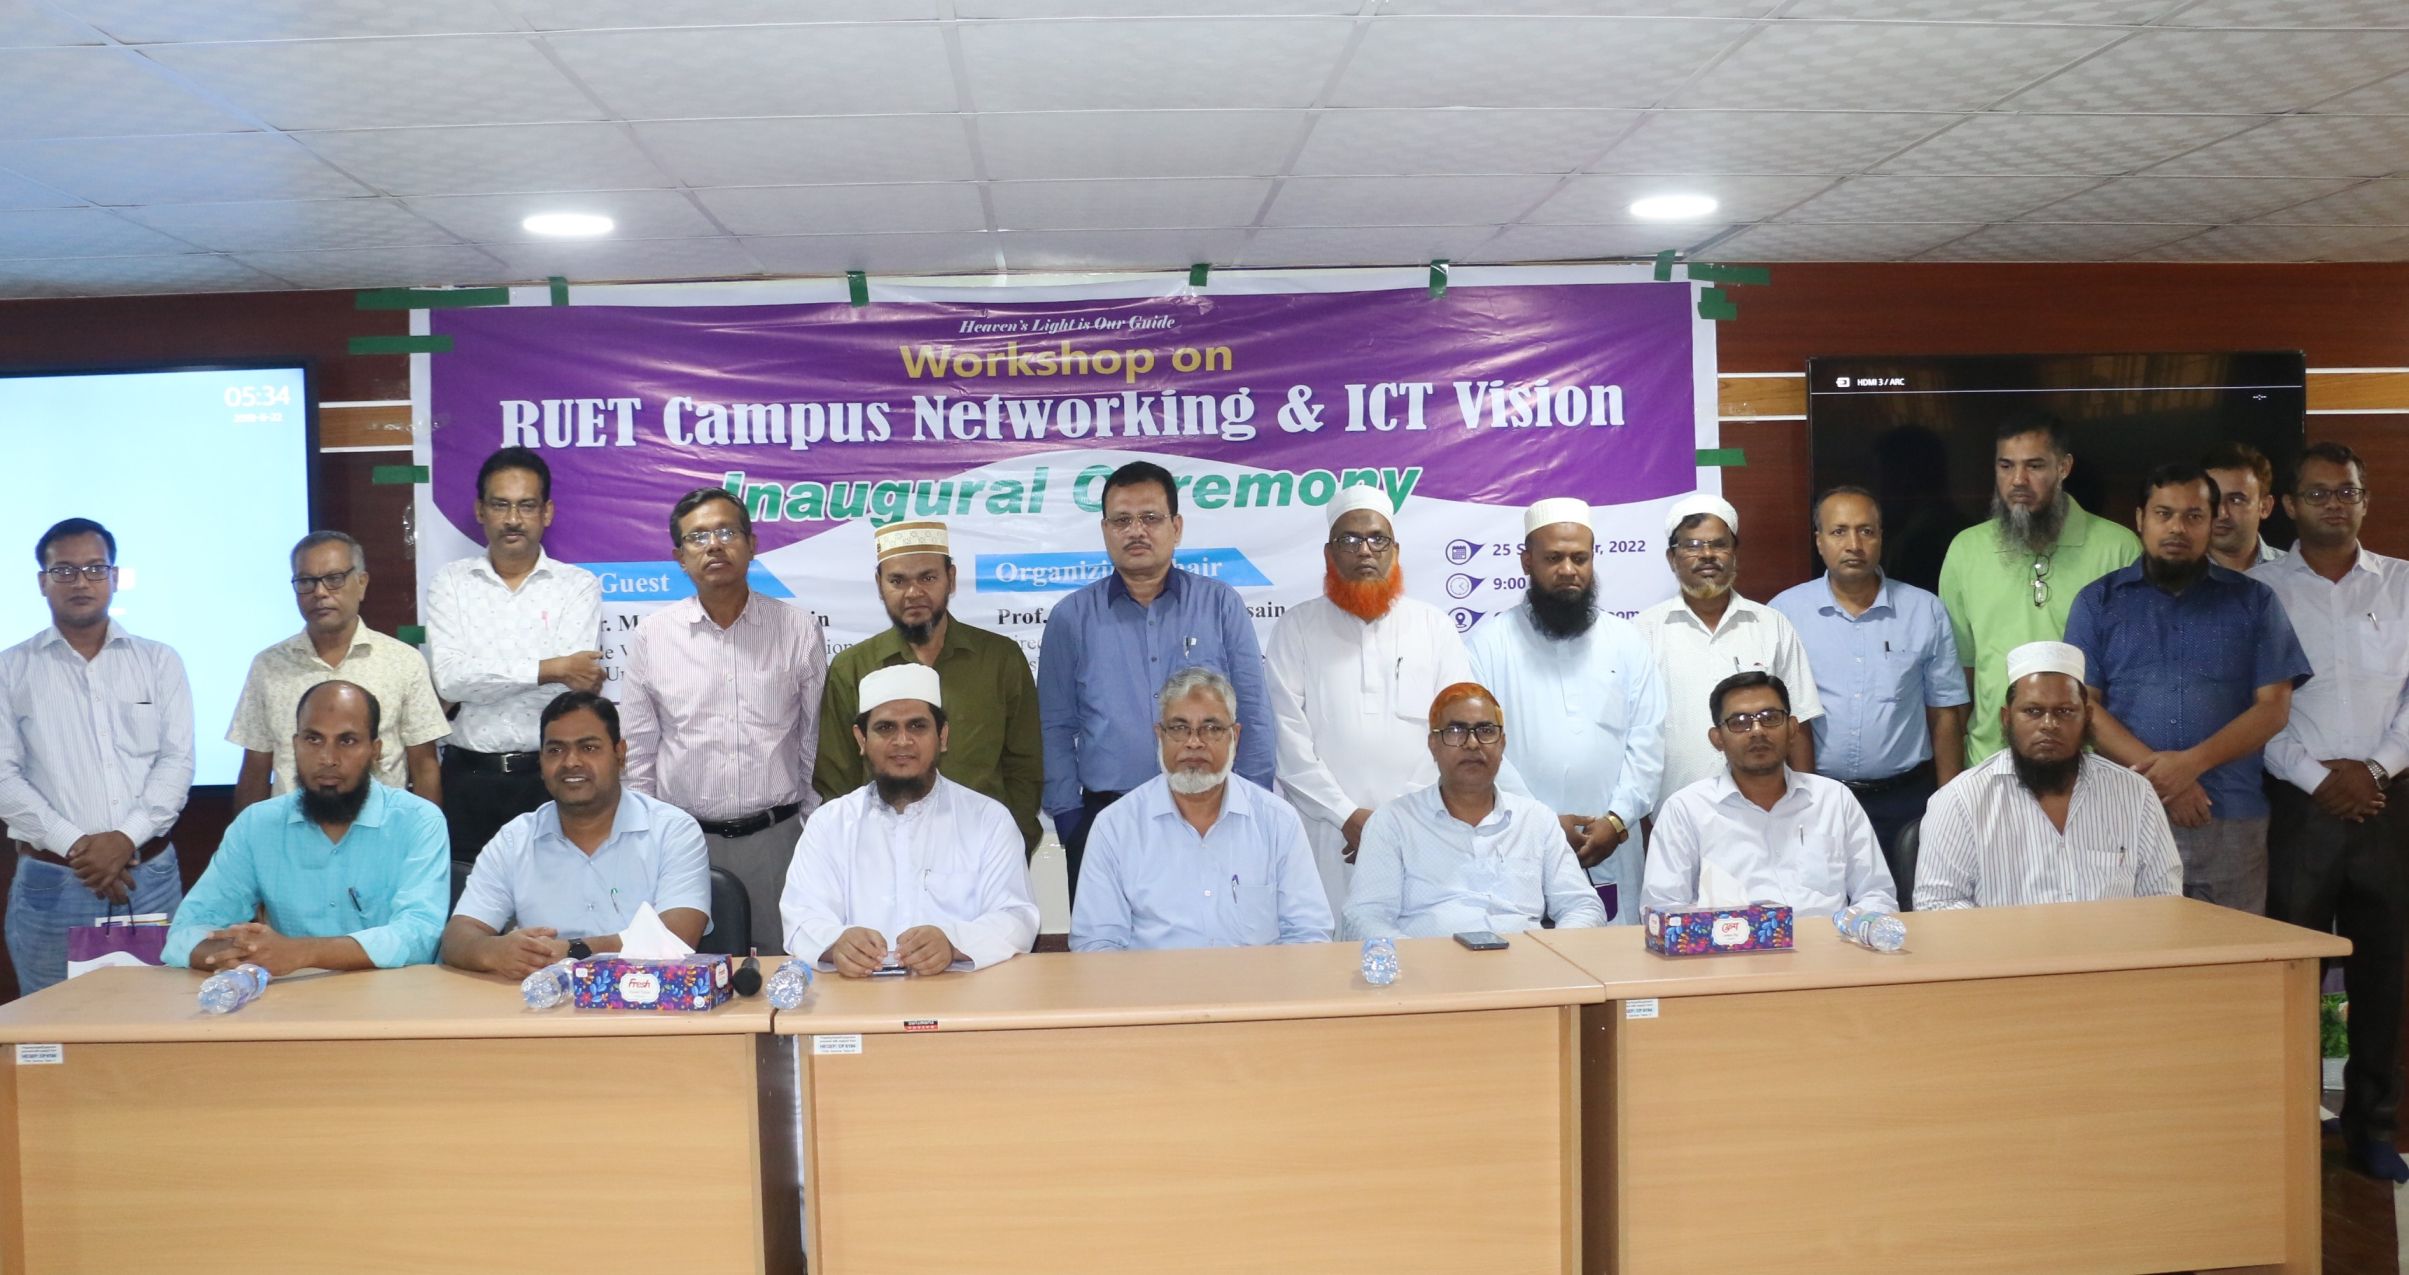 Worksop on RUET Campus Networking and ICT Vision 2022